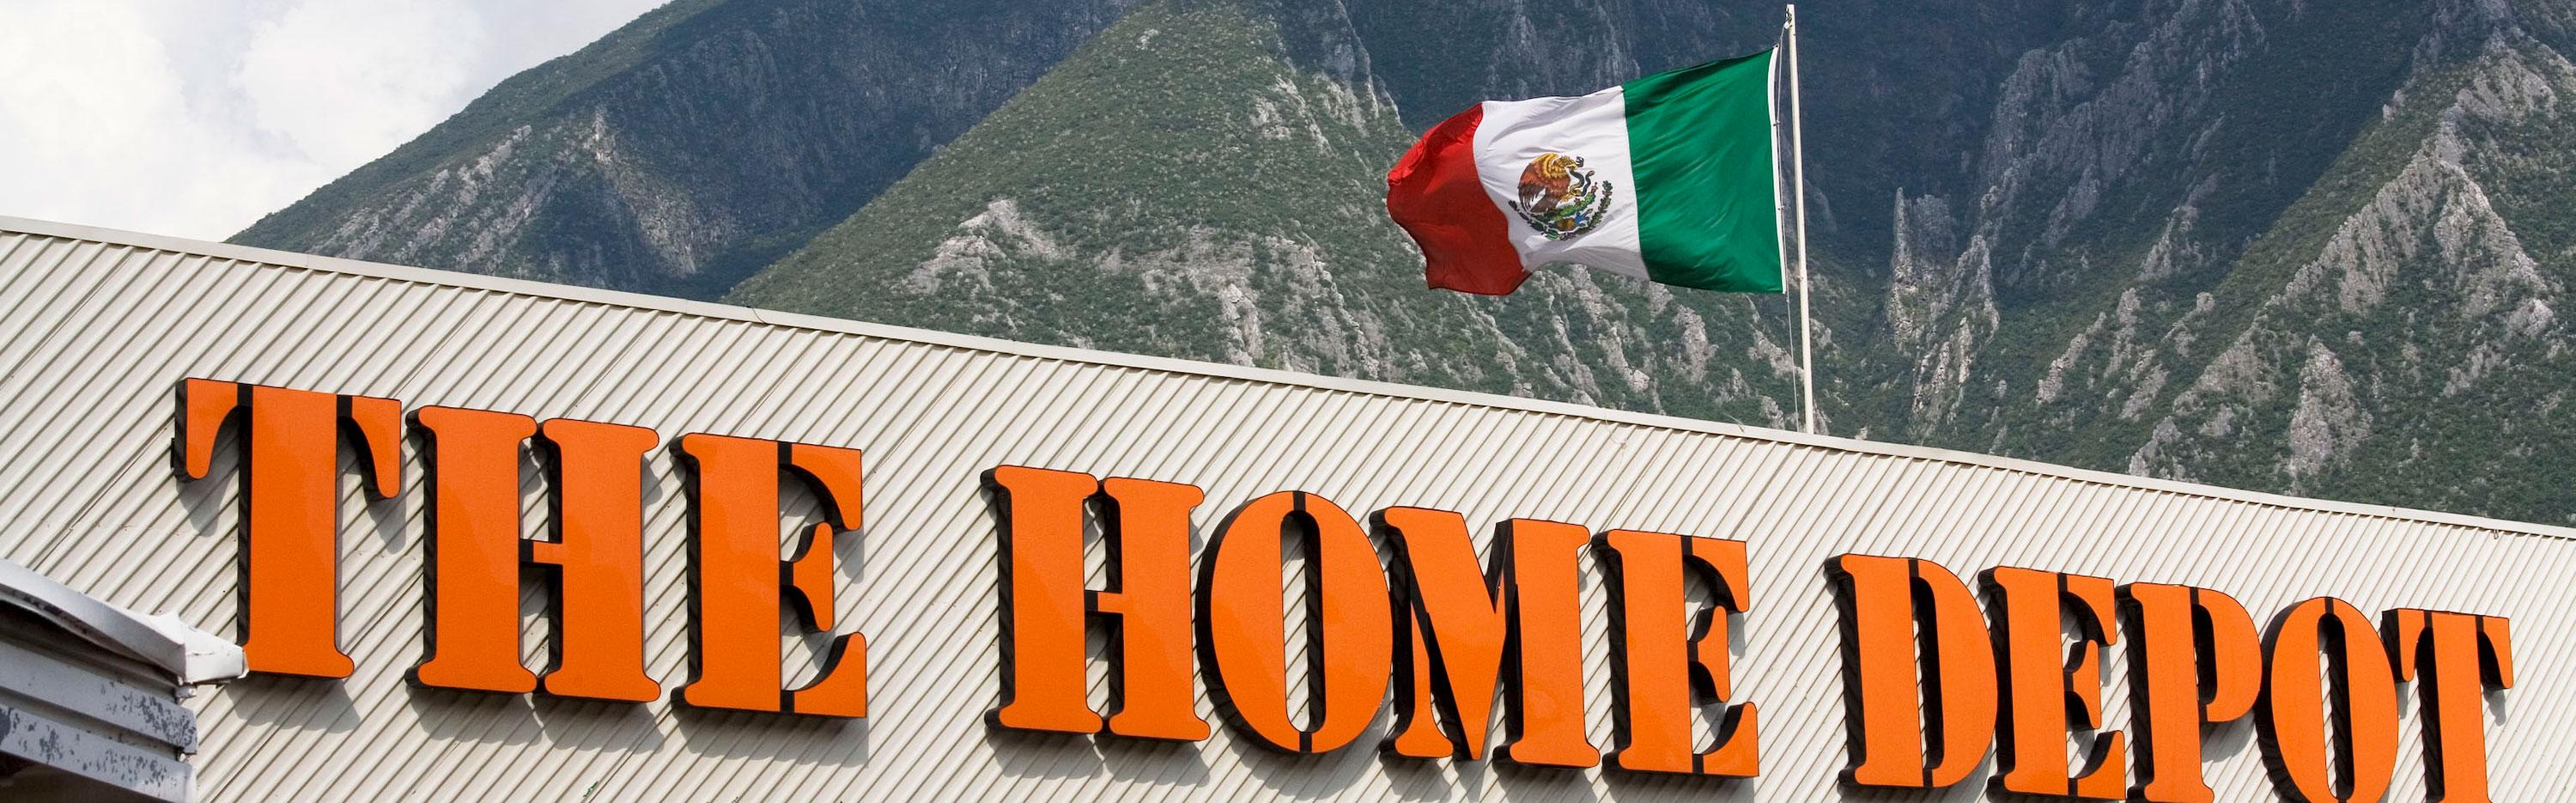 Home Depot store in Mexico